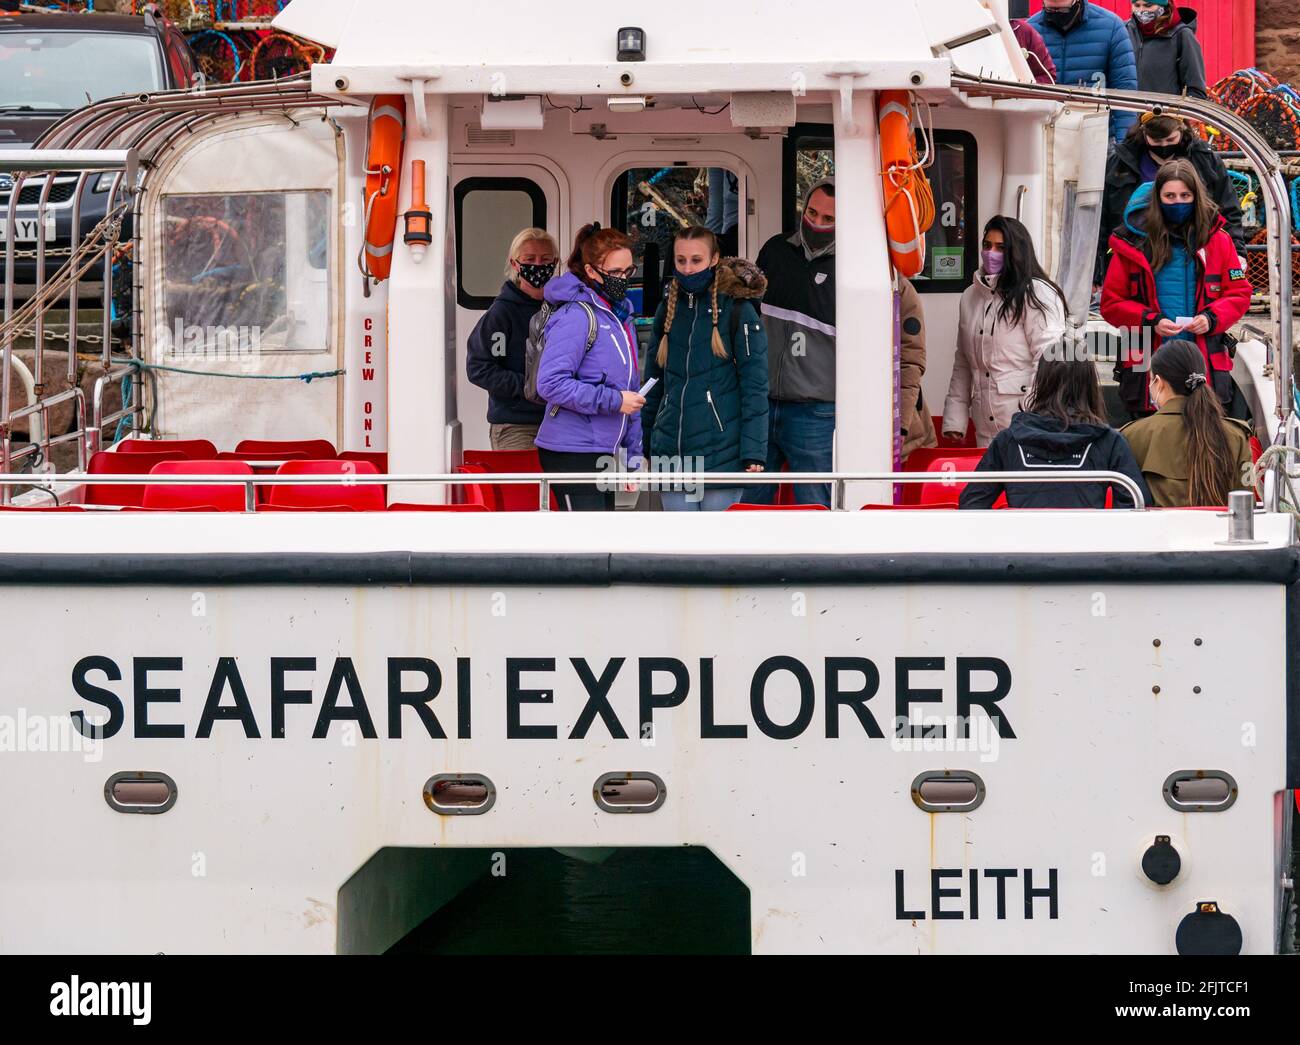 North Berwick, East Lothian, Scotland, United Kingdom, 26th April. Businesses reopen: with lockdown restrictions eased today, the Scottish Seabird Centre first tourist cruise boat outing takes place since last year. Pictured: Passengers board the Seafari Explorer catamaran wearing face masks Stock Photo